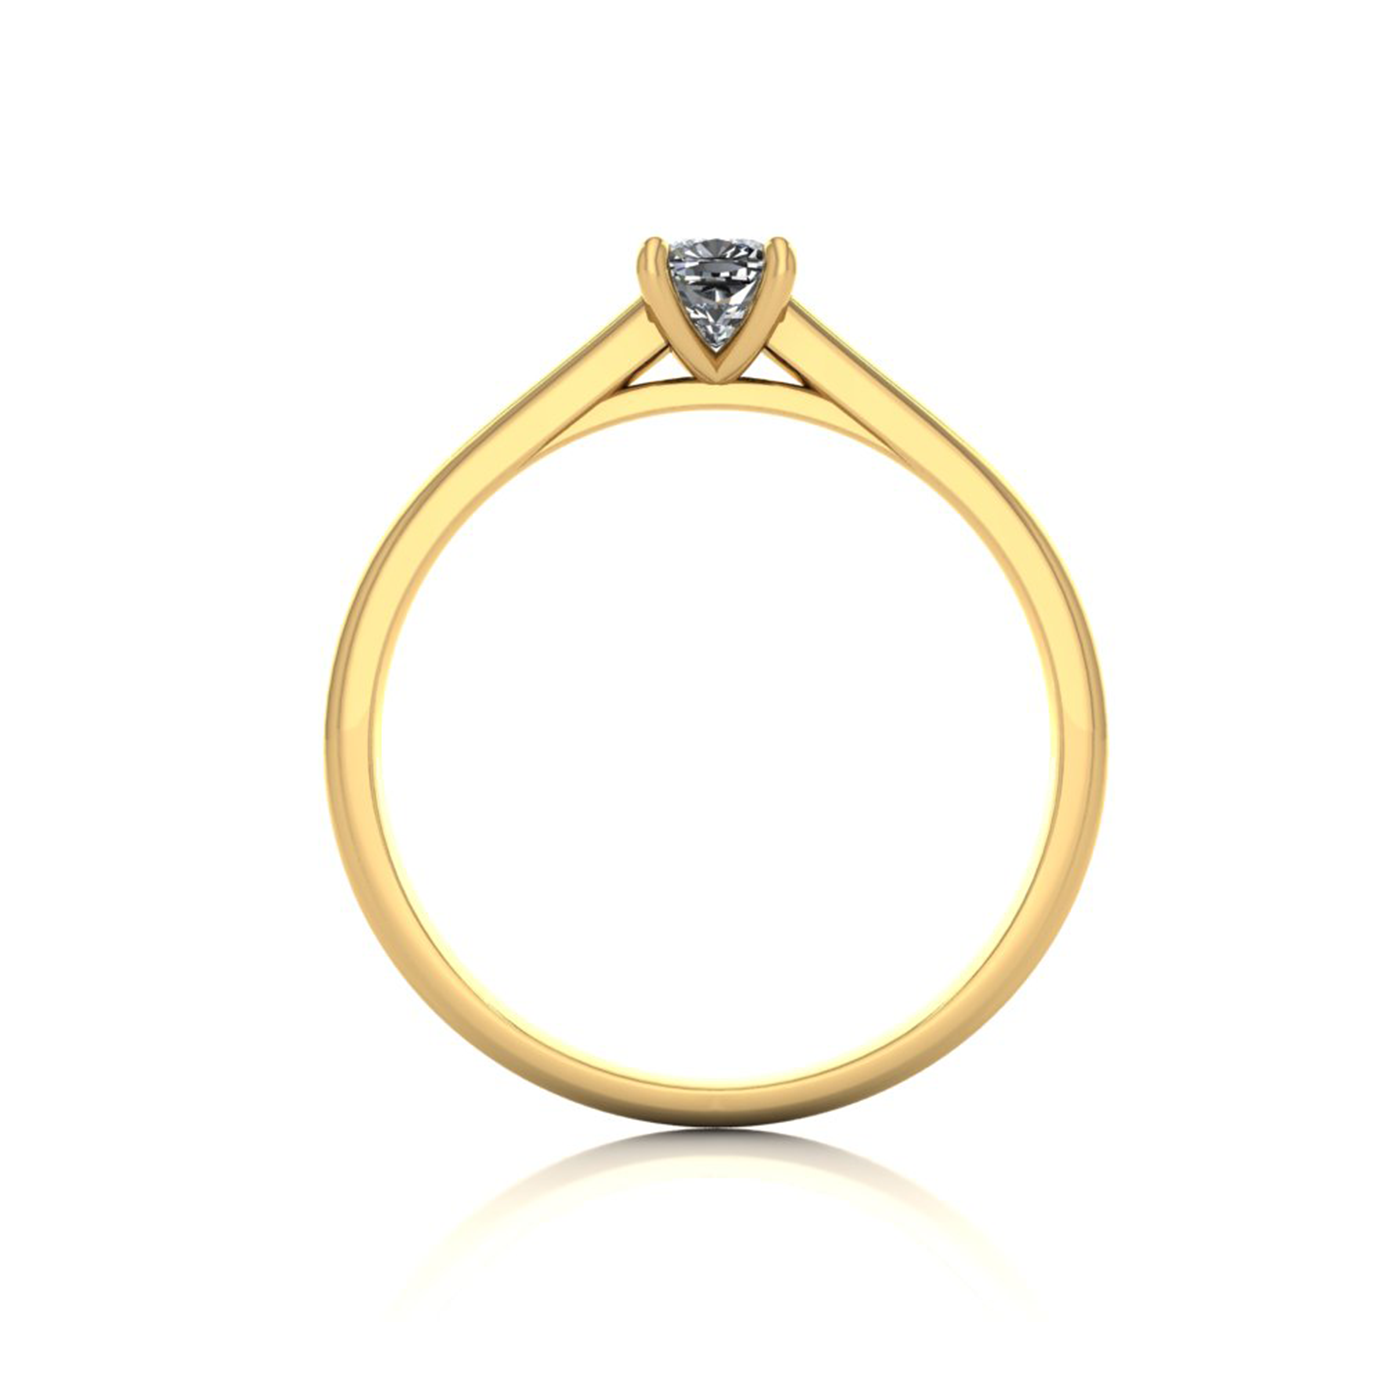 18k yellow gold  0,30 ct 4 prongs solitaire cushion cut diamond engagement ring with whisper thin band